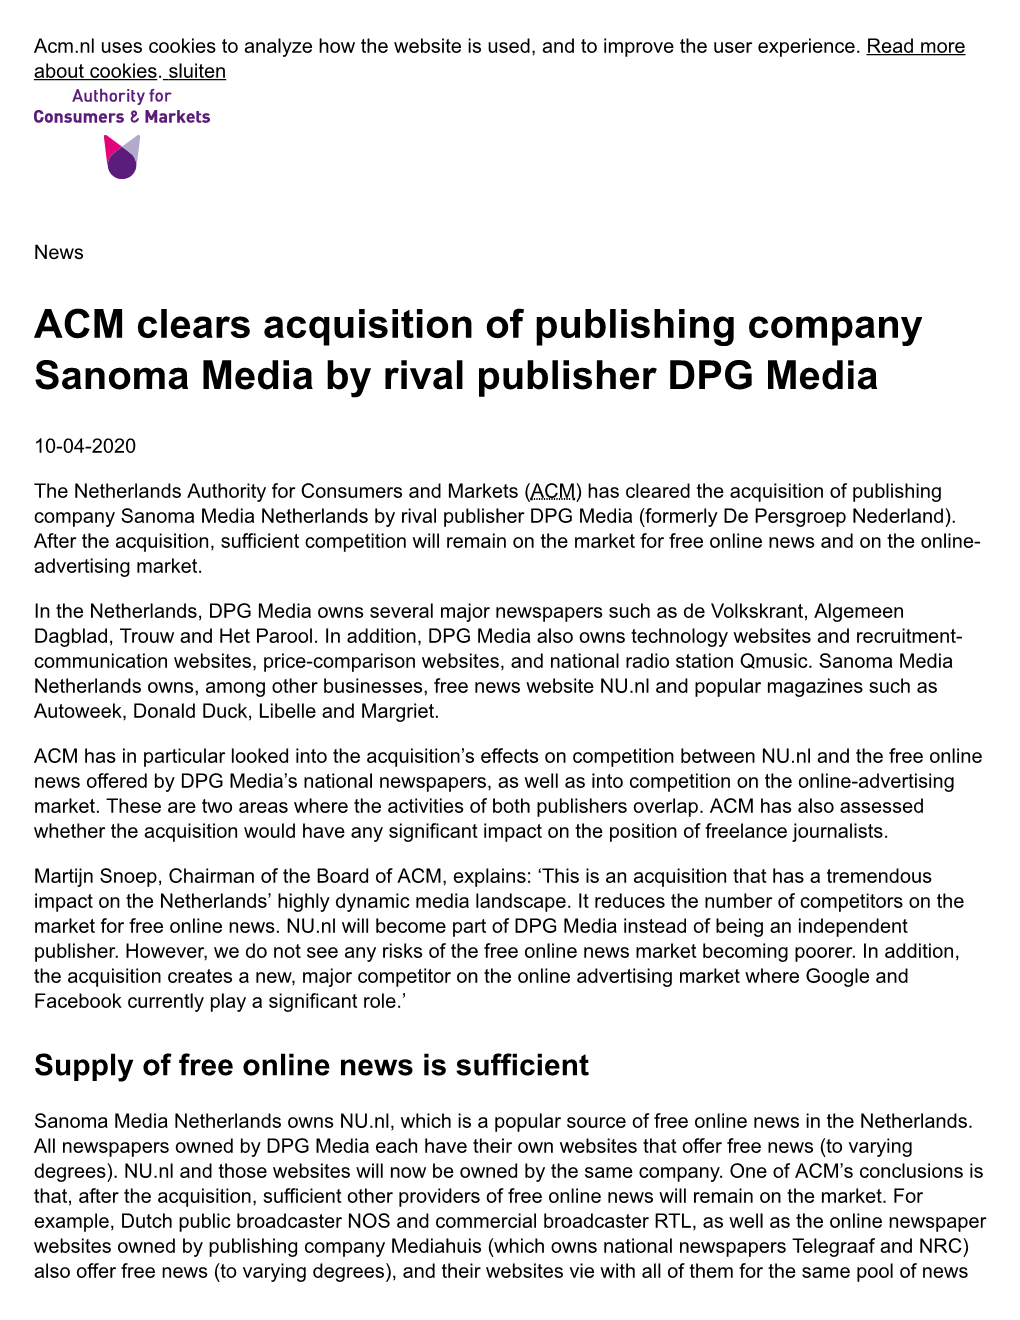 ACM Clears Acquisition of Publishing Company Sanoma Media by Rival Publisher DPG Media